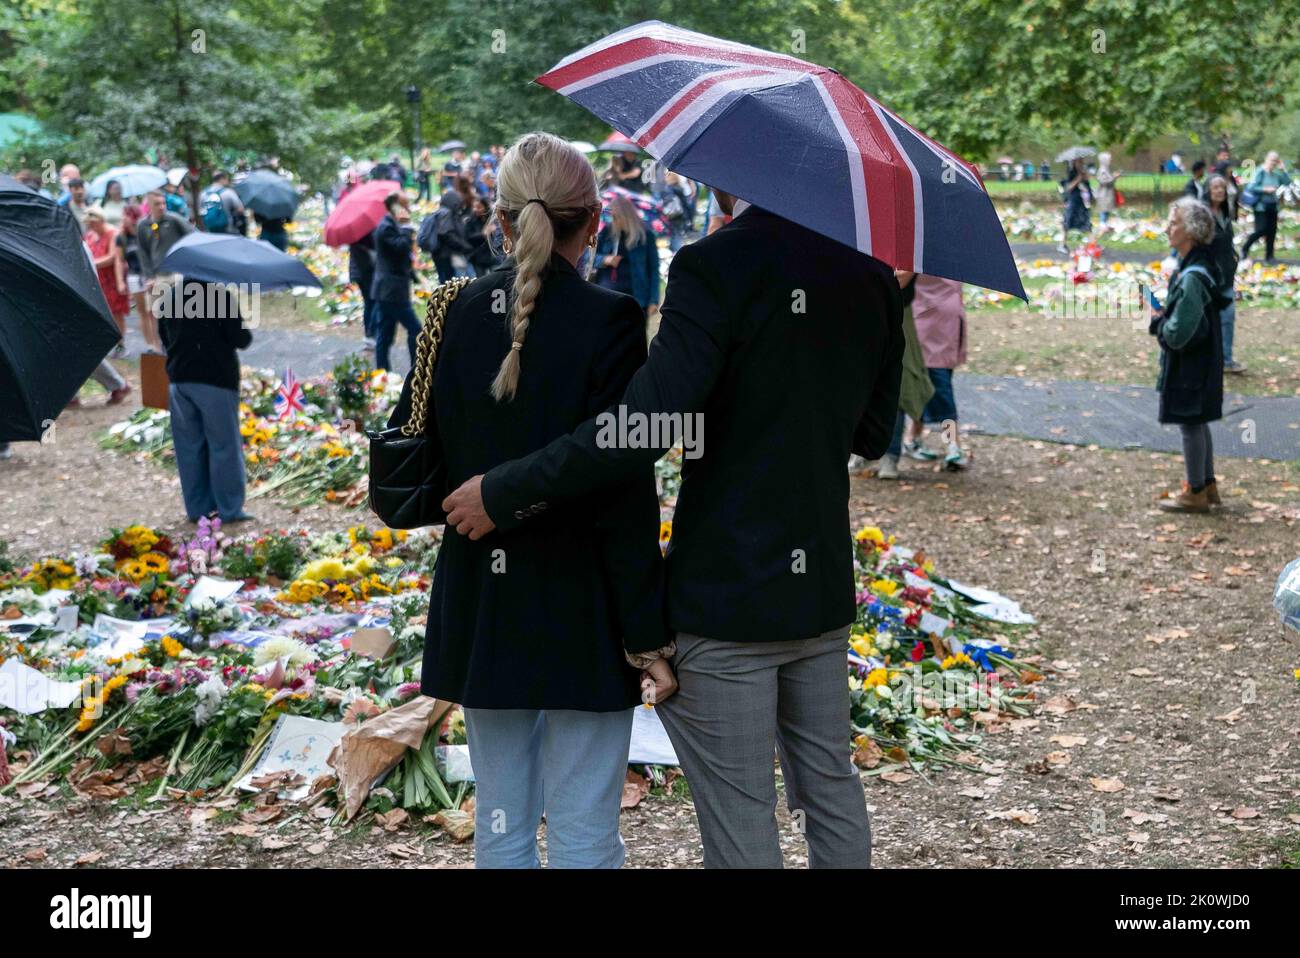 @Jeff Moore Members of the public gather to lay flowers in green park next to Buckingham Palace today after after the death of  Her Majesty Queen Eliz Stock Photo